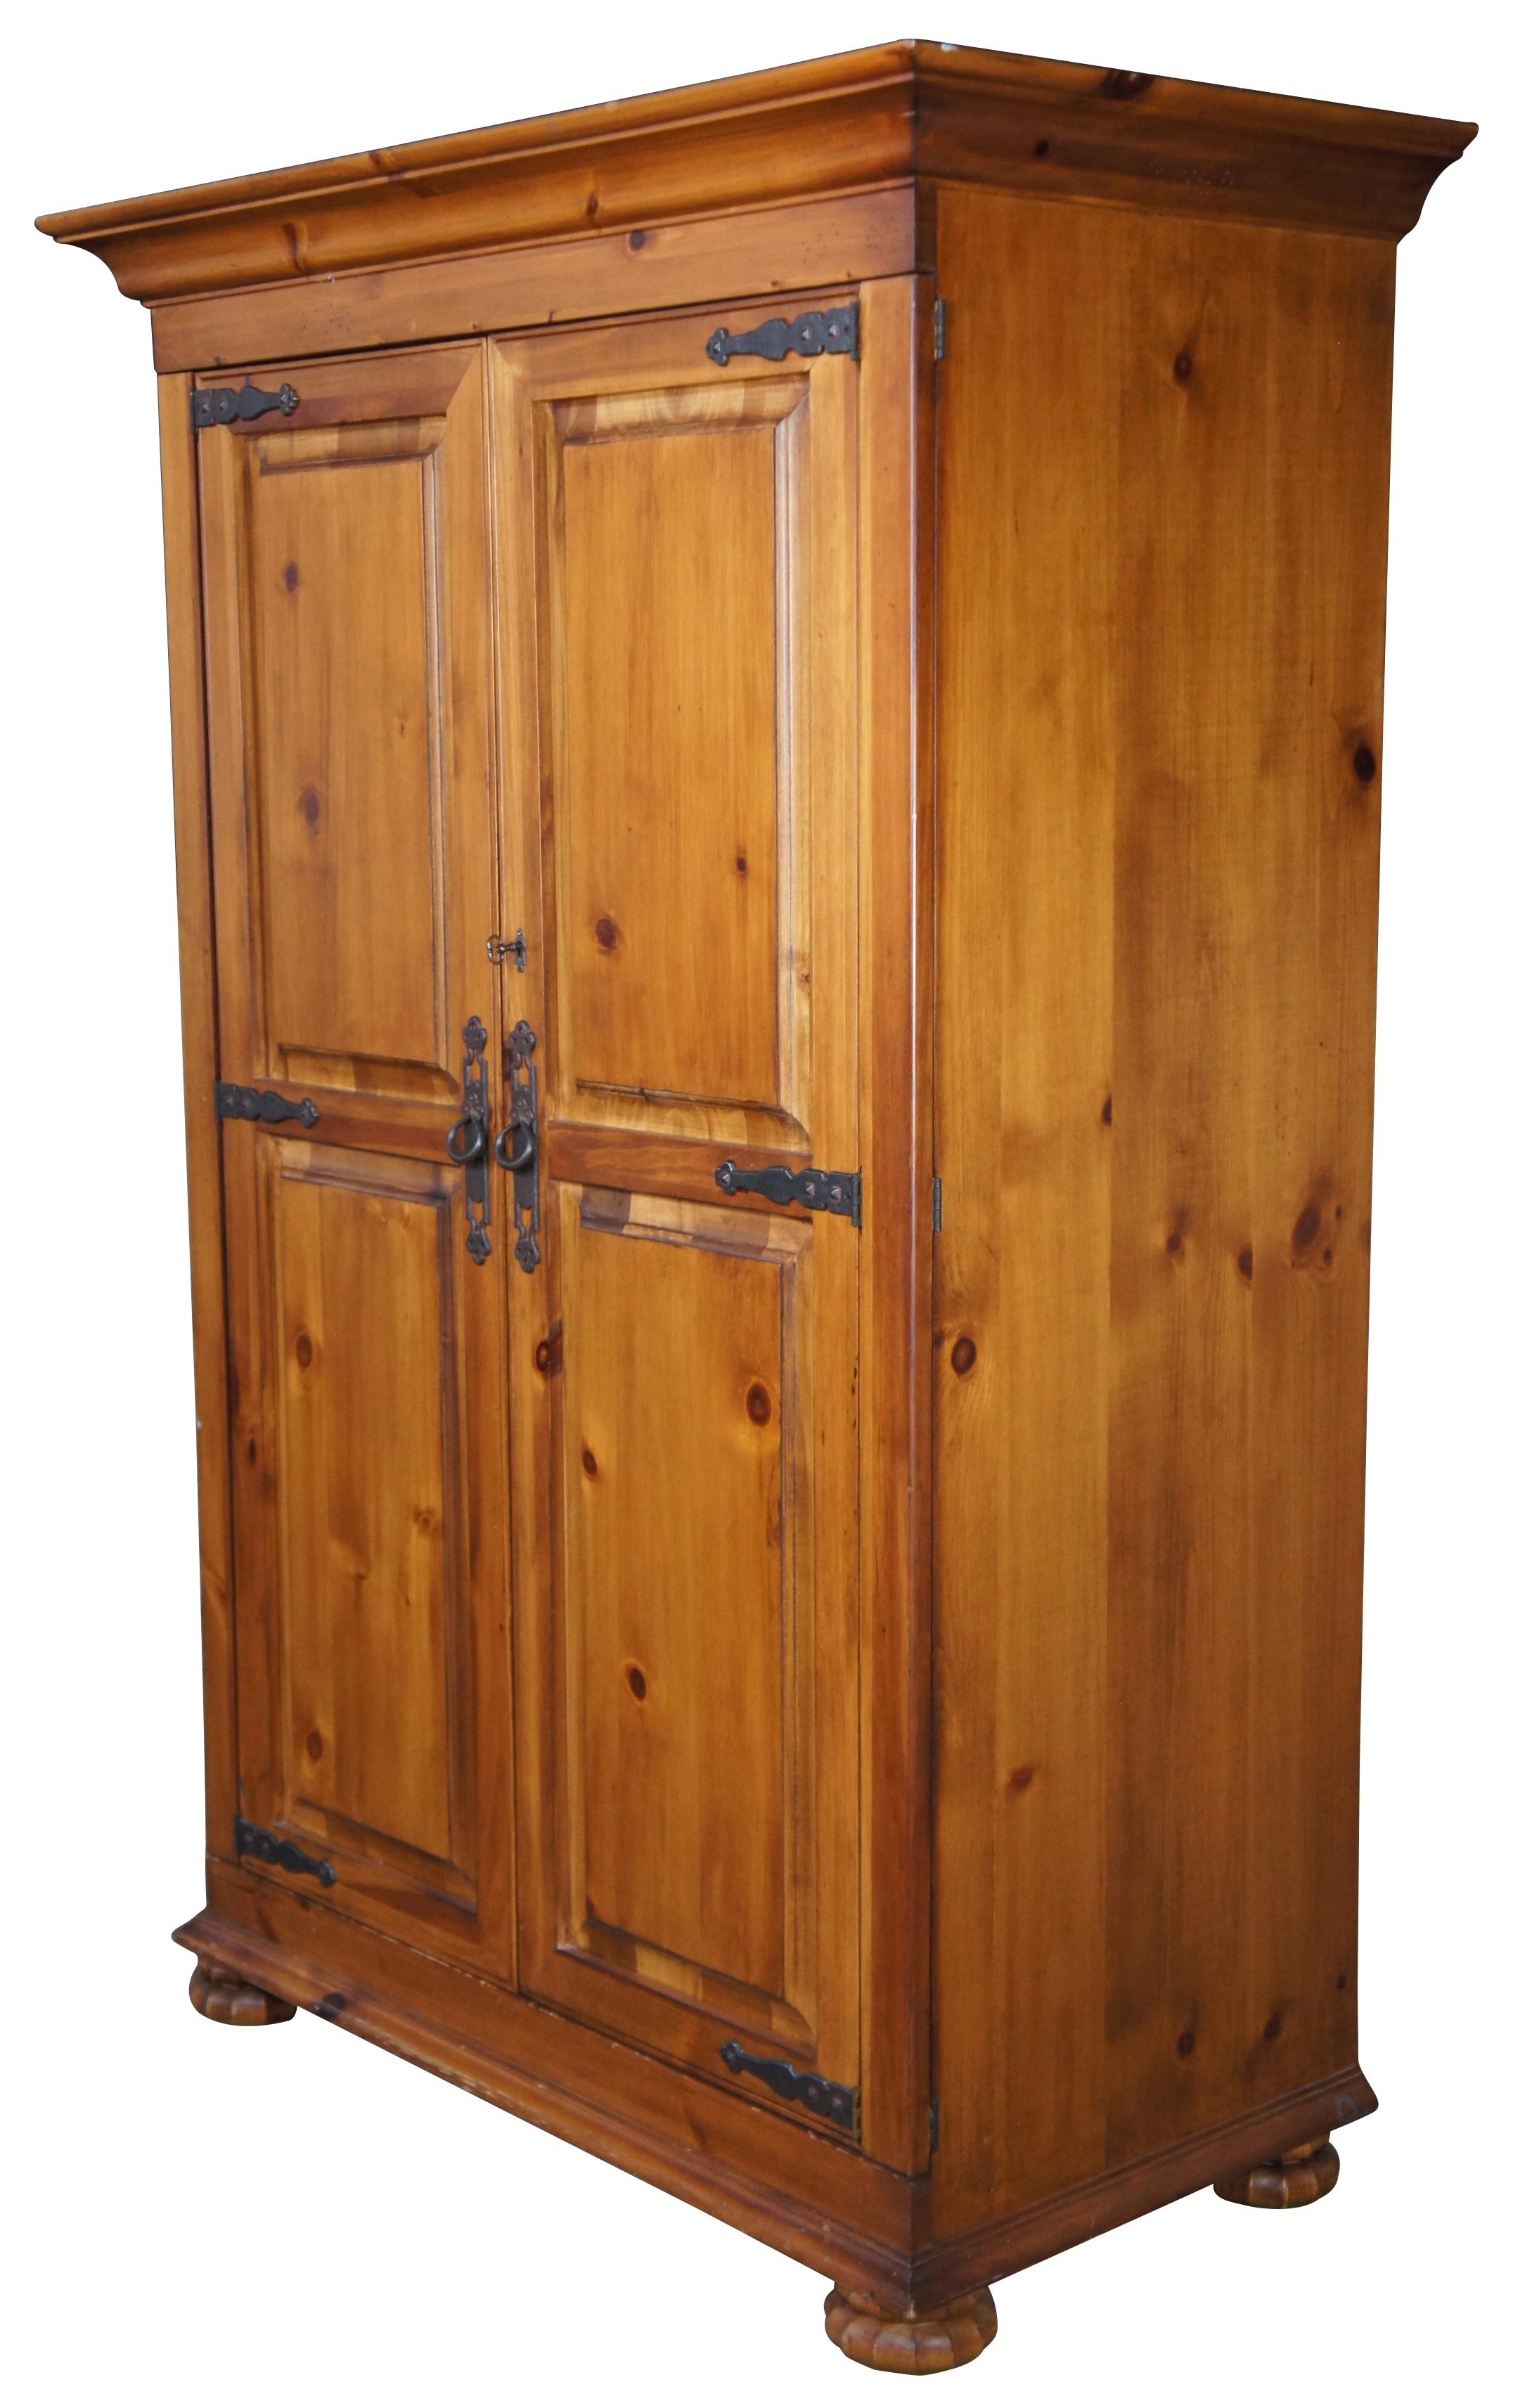 Vintage Jim Peed for Romweber furniture TV entertainment cabinet or armoire. Made of pine featuring iron hardware with paneled doors, round scalloped feet and double hinged doors. Measure: 81